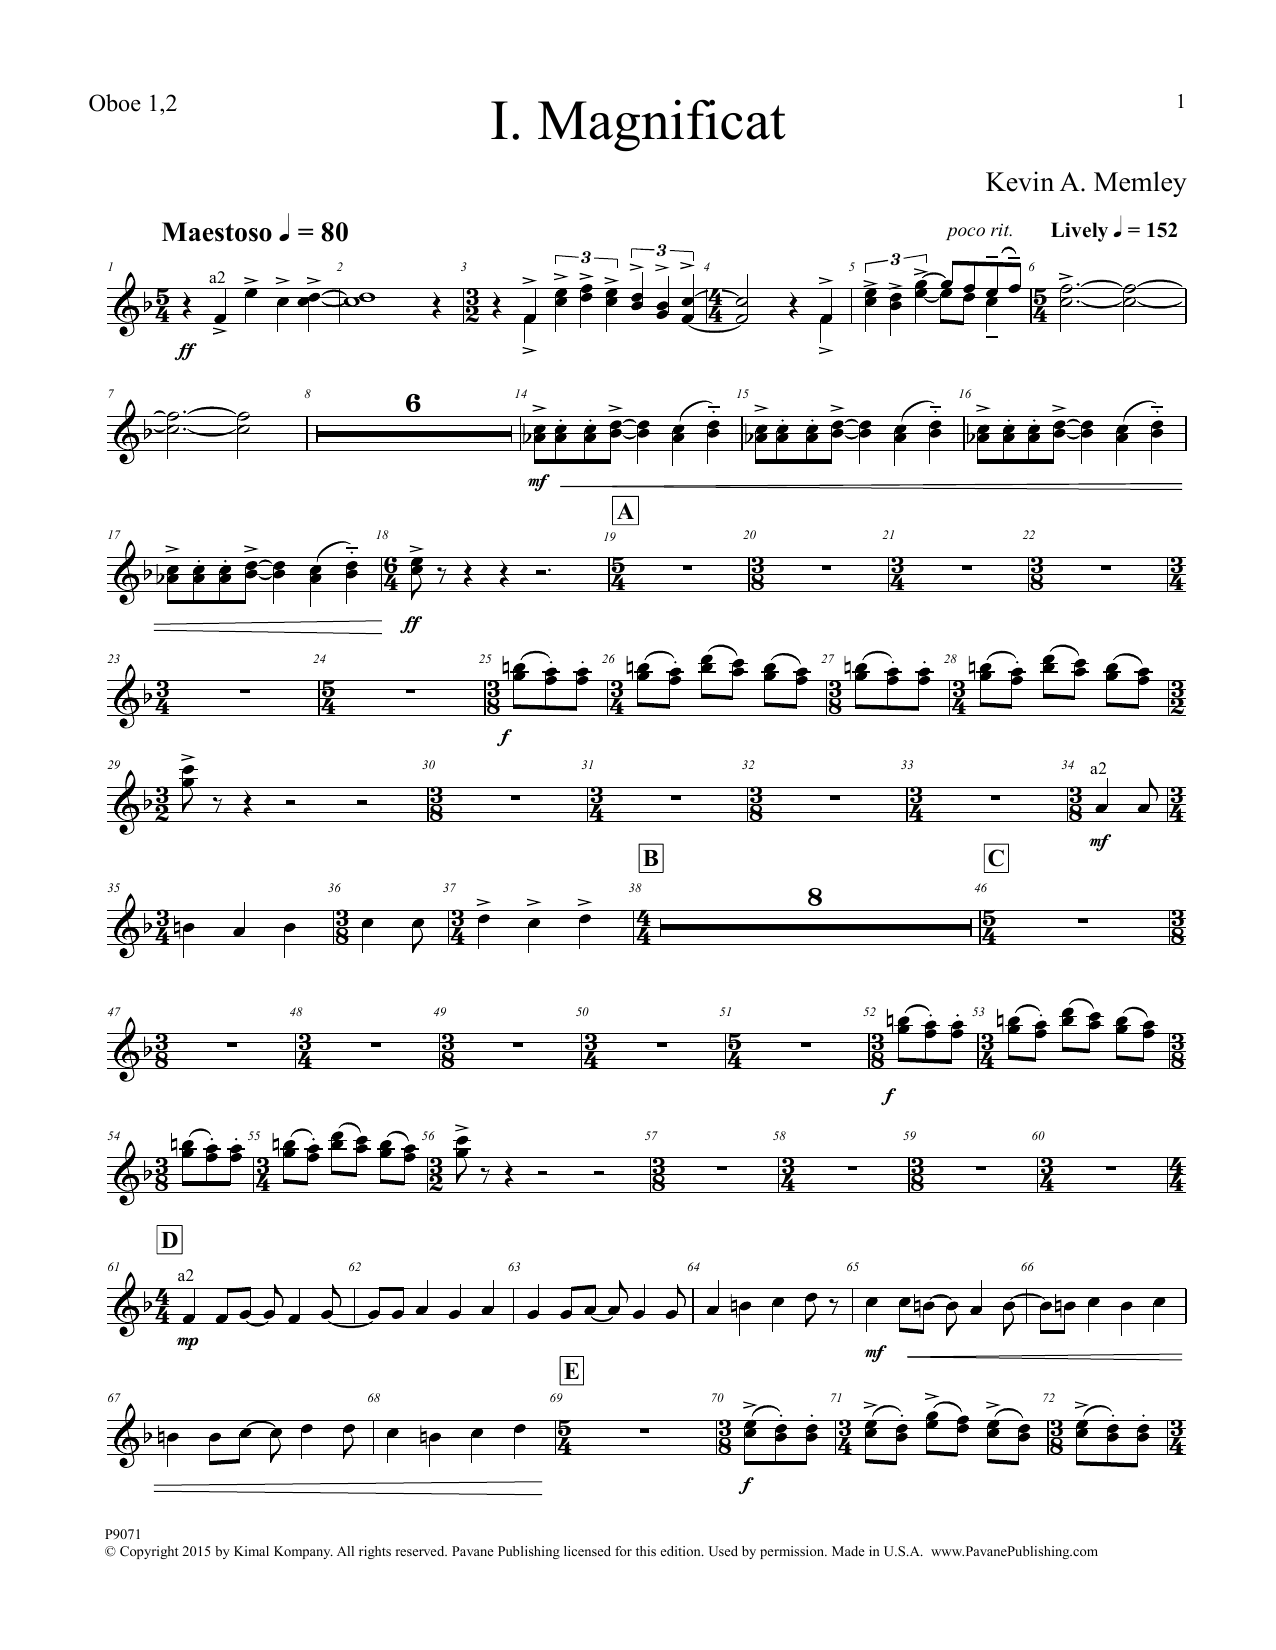 Download Kevin A. Memley Magnificat - Oboe 1,2 Sheet Music